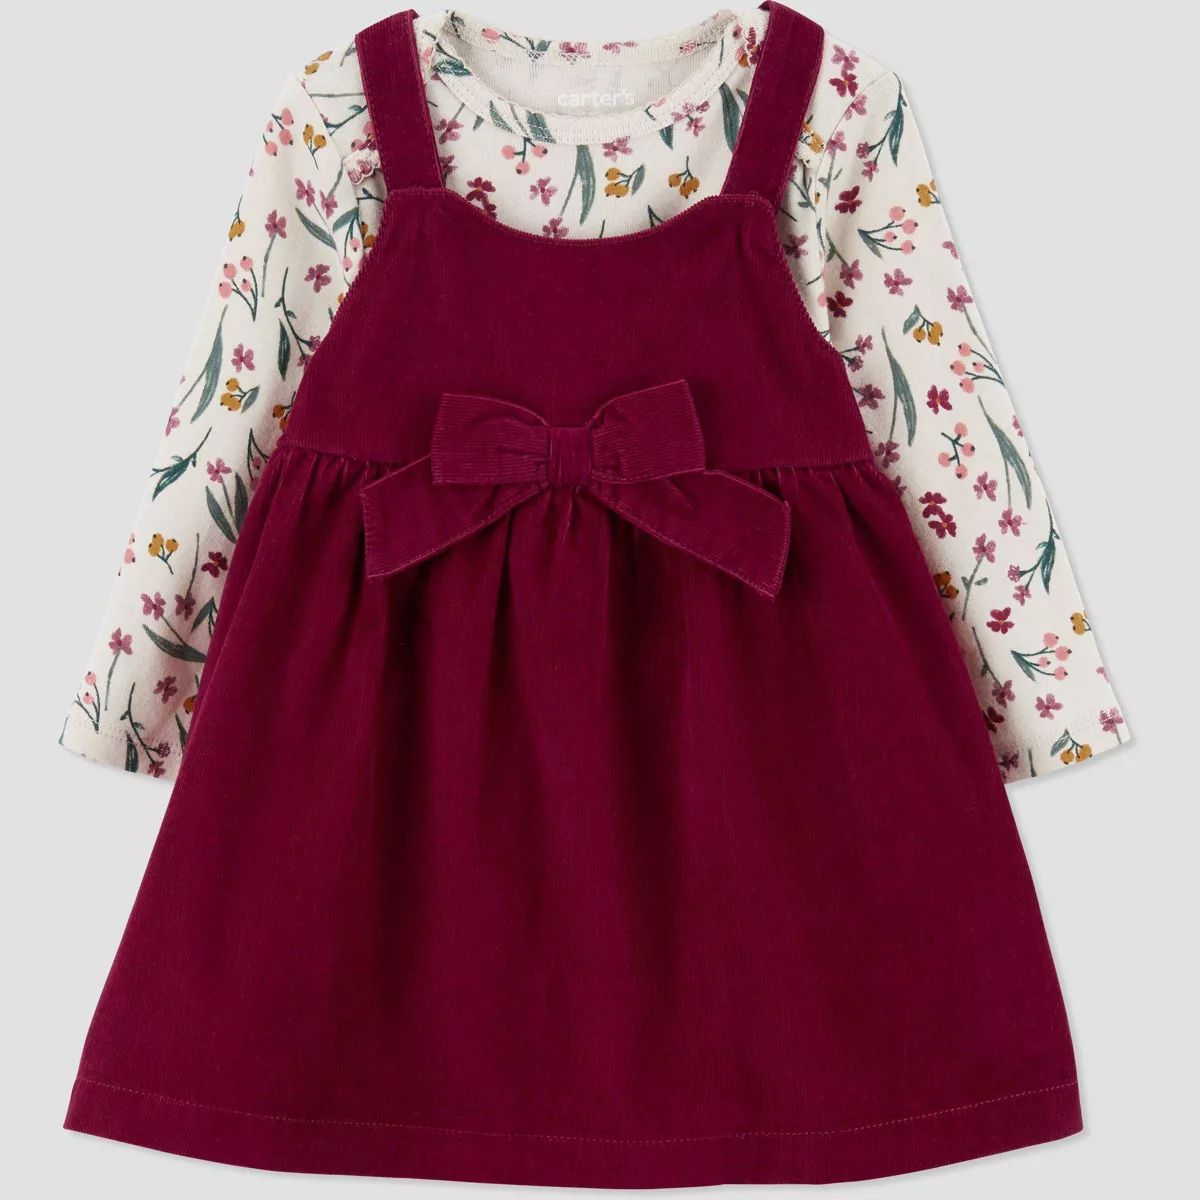 Carter's Just One You®️ Baby Girls' Floral Top & Skirtall Set - Burgundy | Target